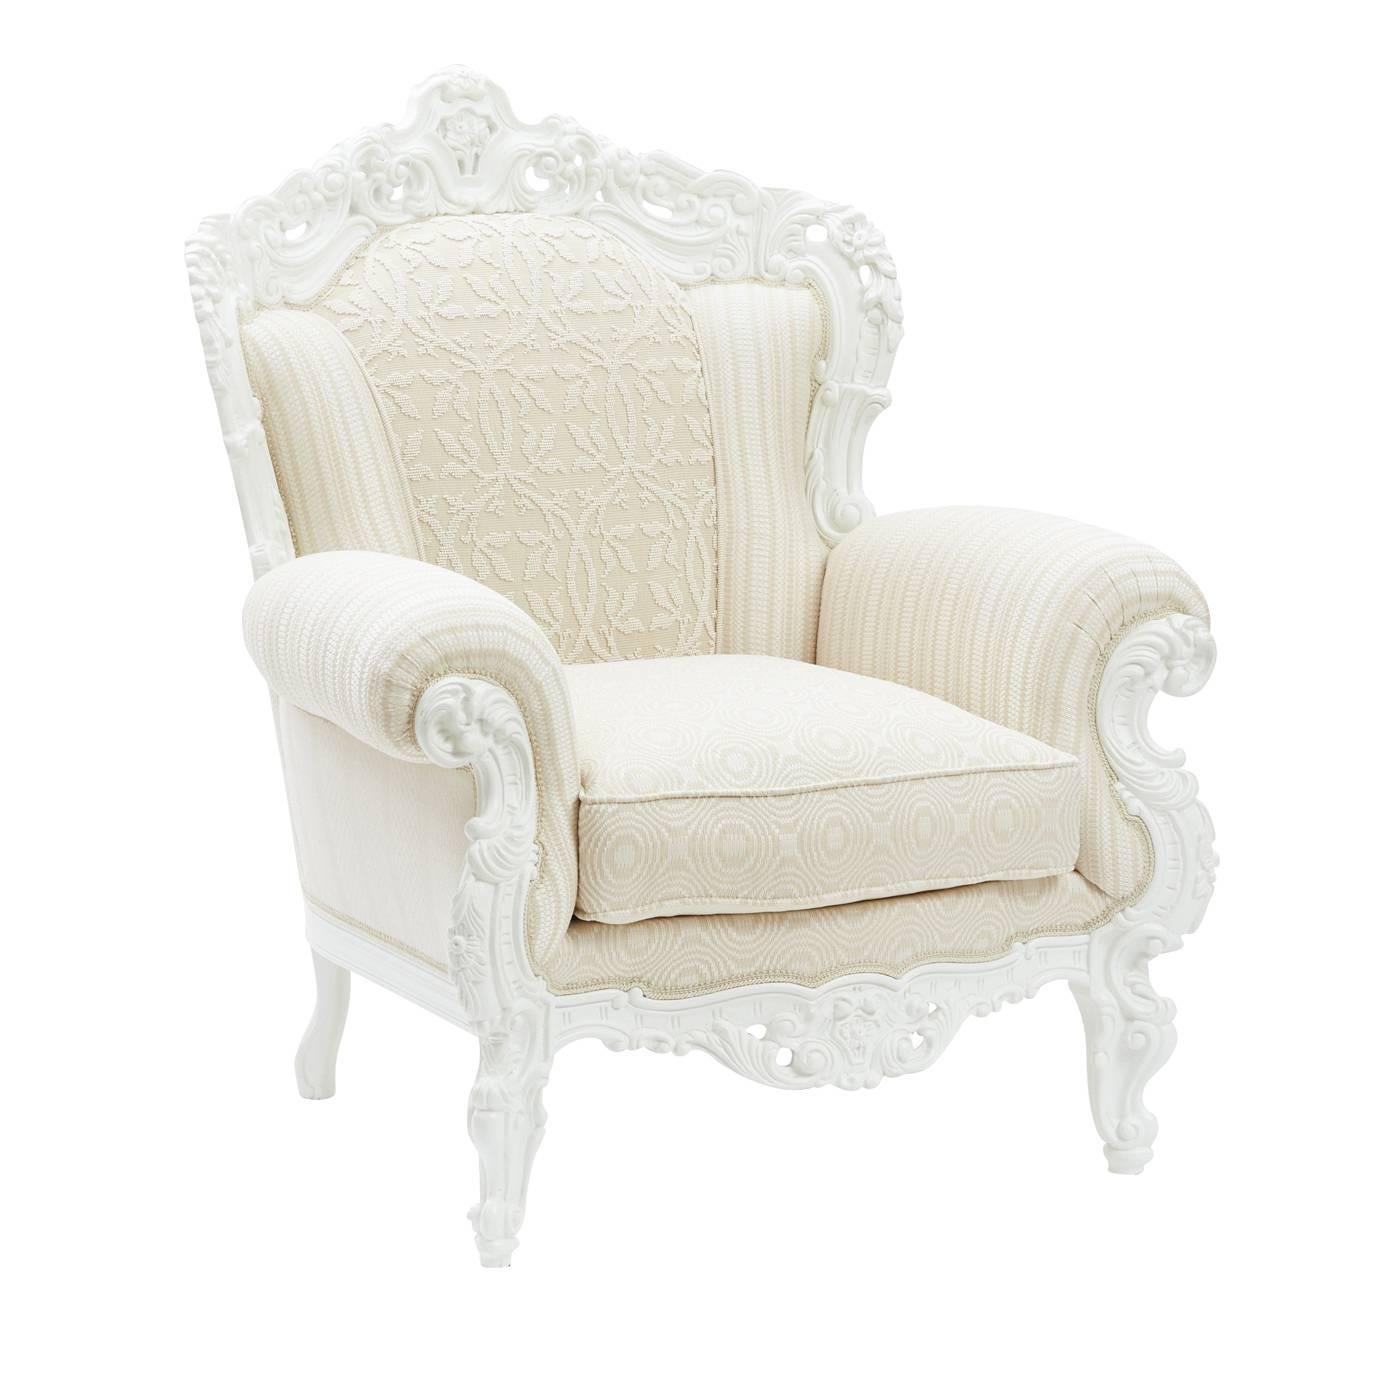 The Baroque structure of this magnificent chair, in poplar wood with Baroque intaglio carvings, was given a white matte finish to modernize the design. Tradition is not forgotten, though, and returns in the precious fabrics that adorned the